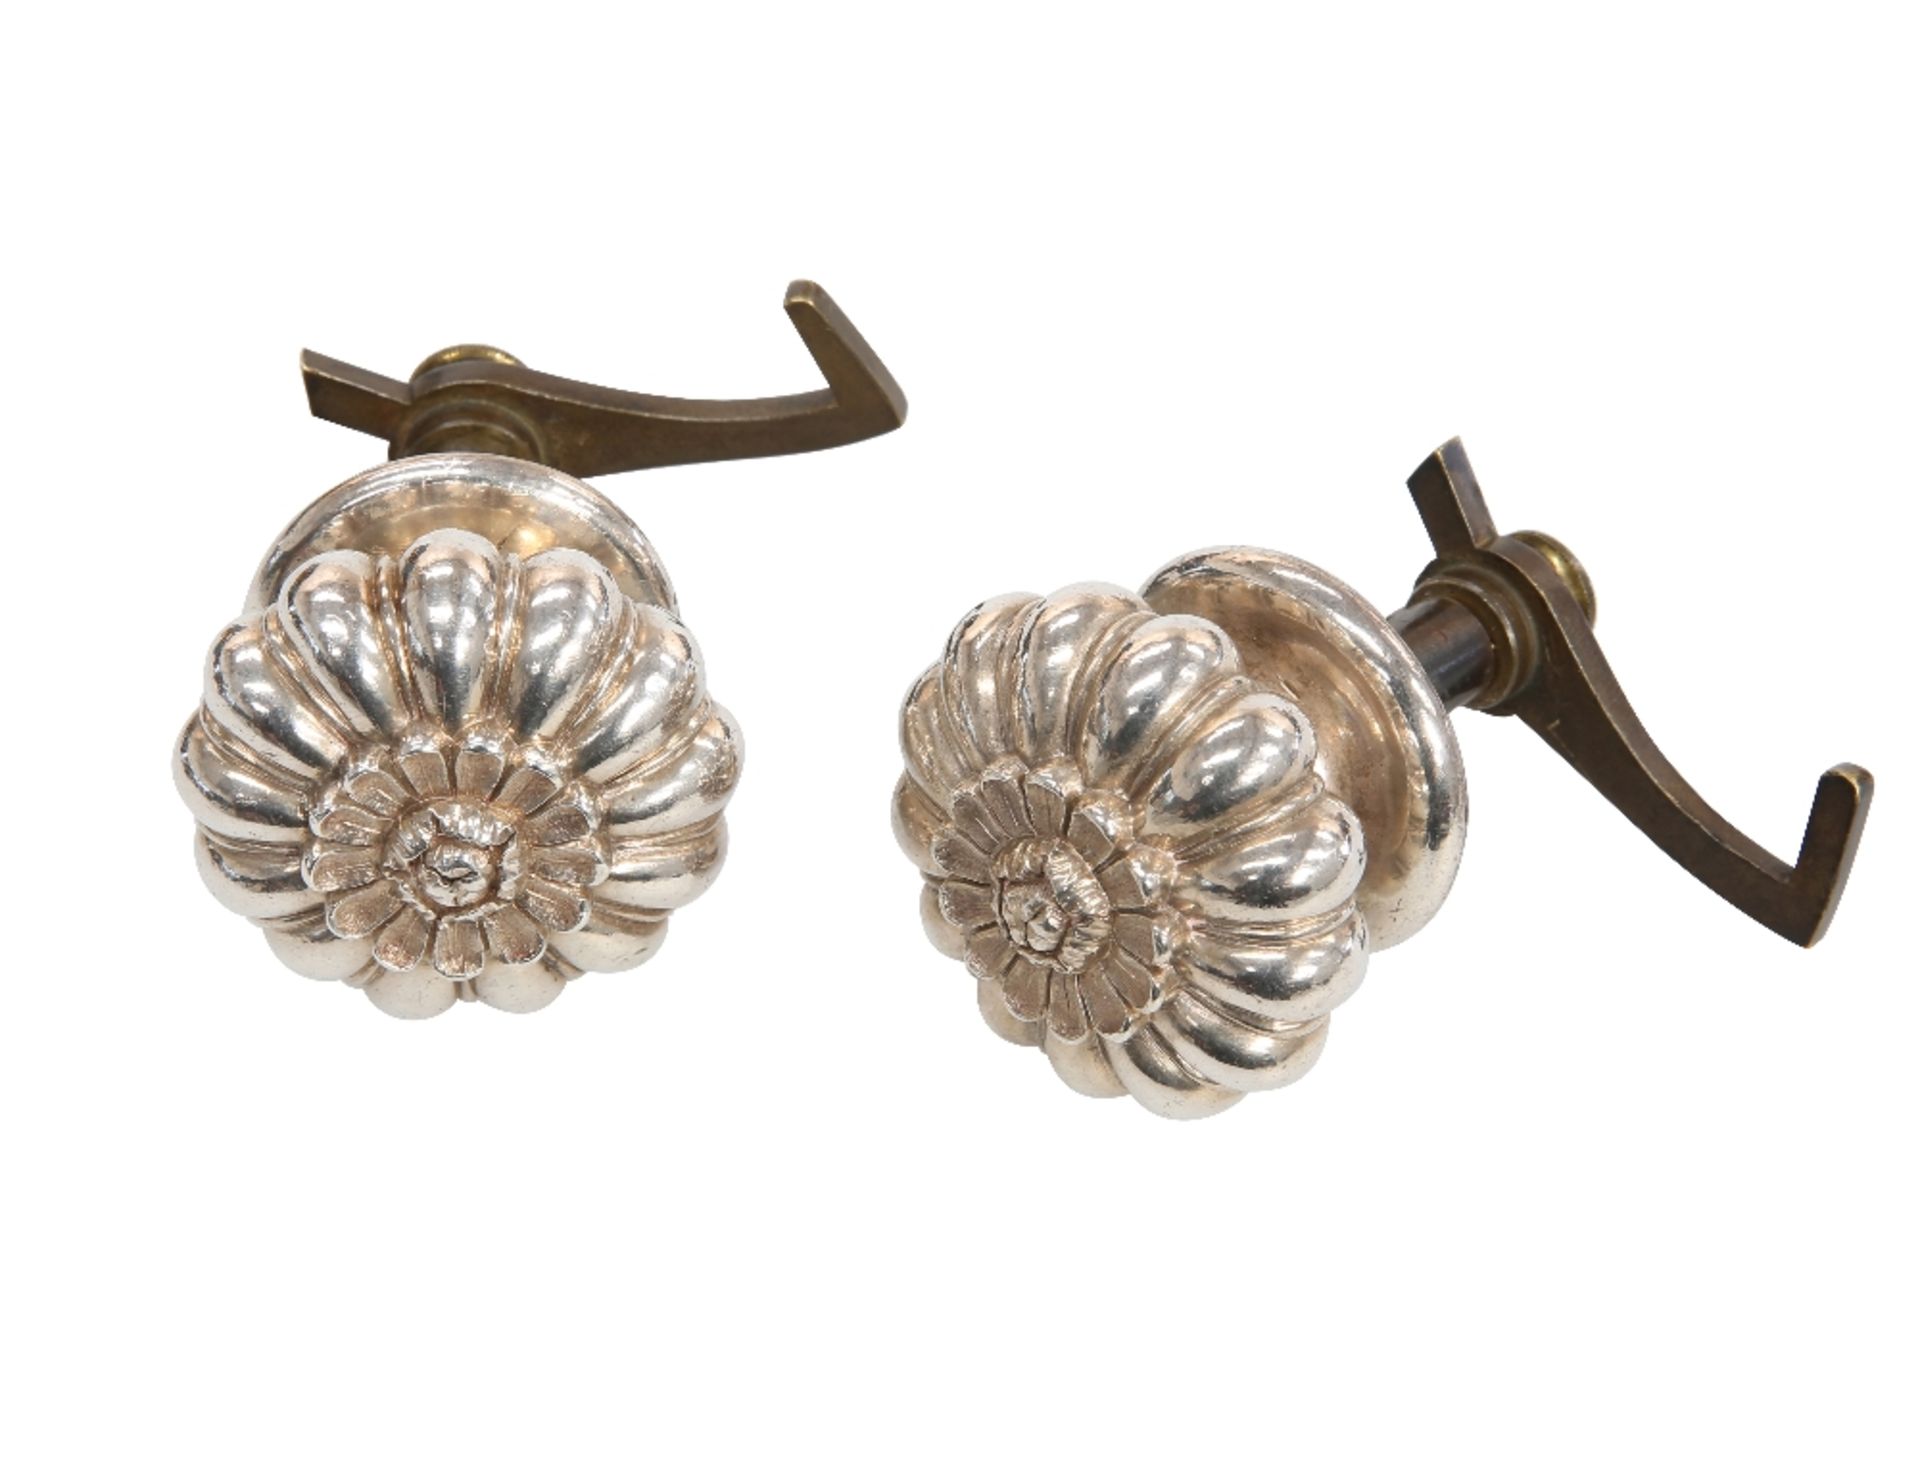 A PAIR OF WILLIAM IV SILVER-MOUNTED DOOR-HANDLES